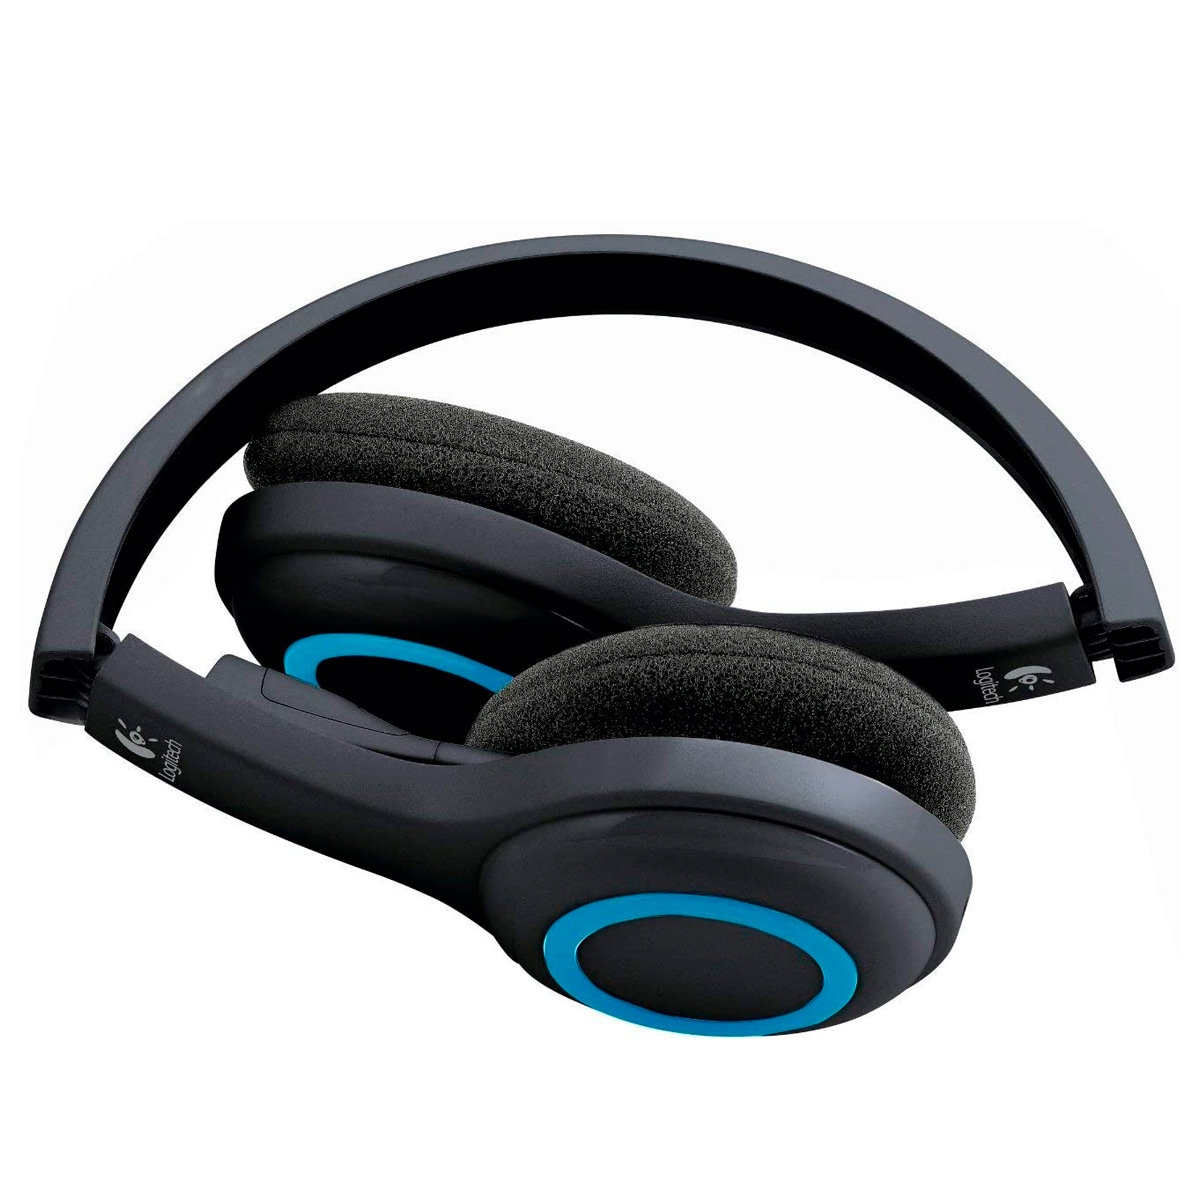 Auriculares Inalámbricos Logitech Over-the-head H600 - M y M Suministros